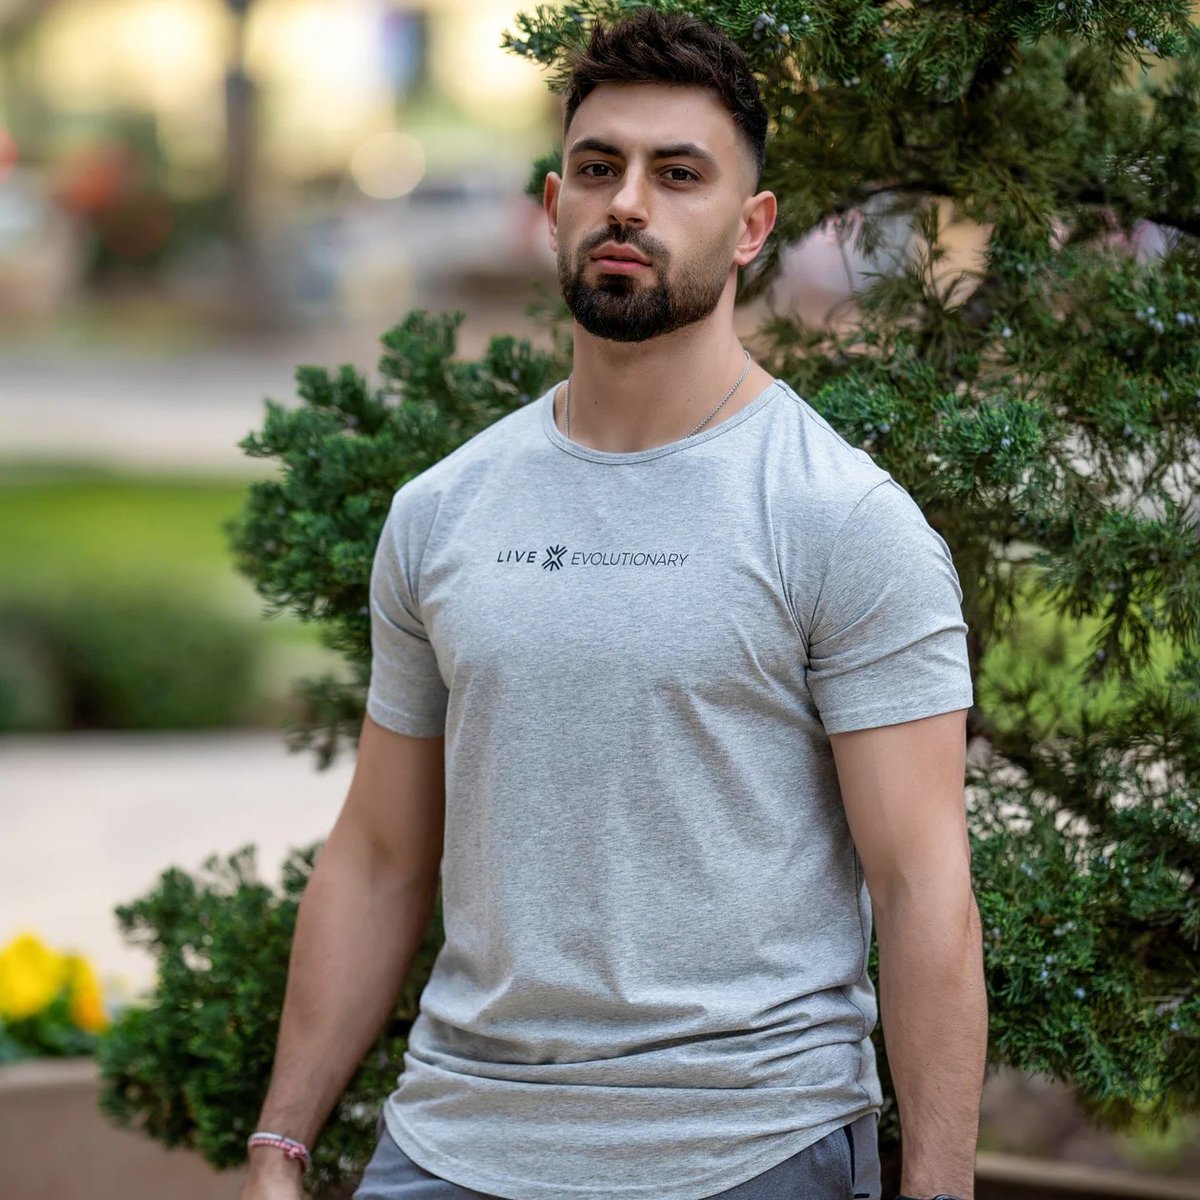 Our Velocity 2.0 Mens tees are the perfect addition to your summer wardrobe! designed to keep you cool in the gym, they also keep you cool in the summer heat ☀️ 

model: @kristiyan_chakalov 
- 
- 
#workoutwear #sale #DFW #gym #gymwear #athleisure #lieevolutionary